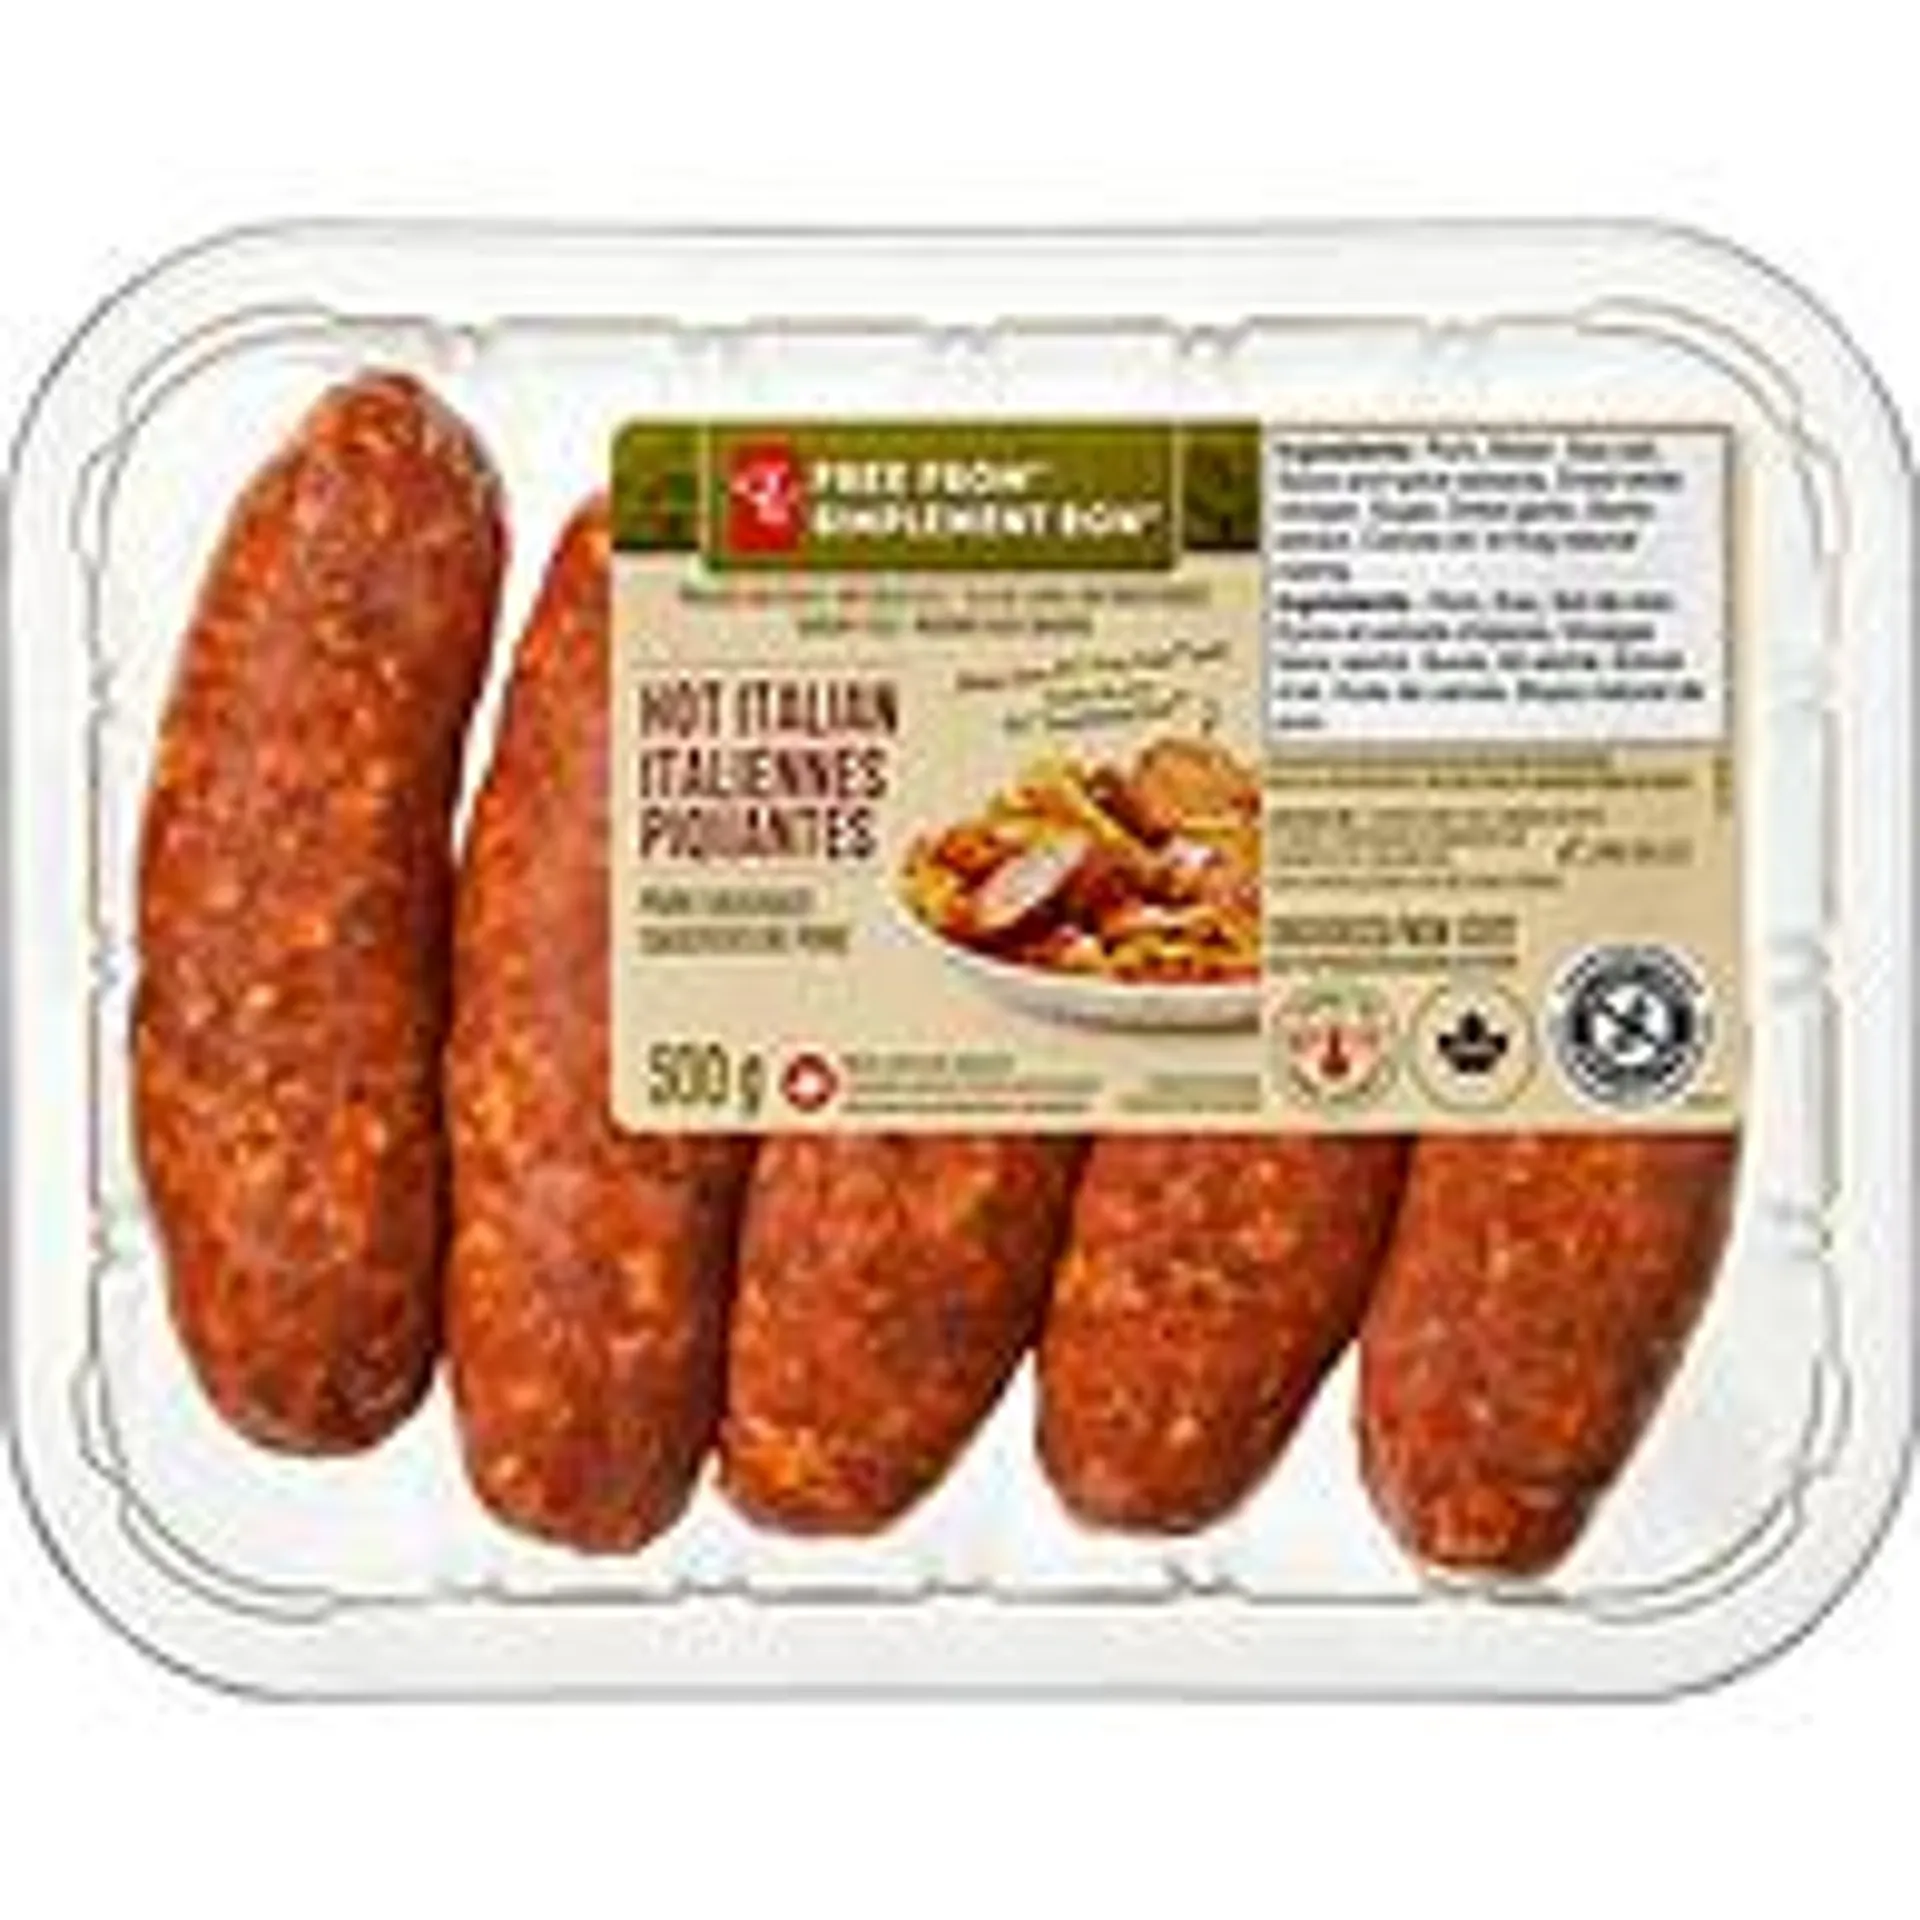 Free From Hot Italian Pork Sausages